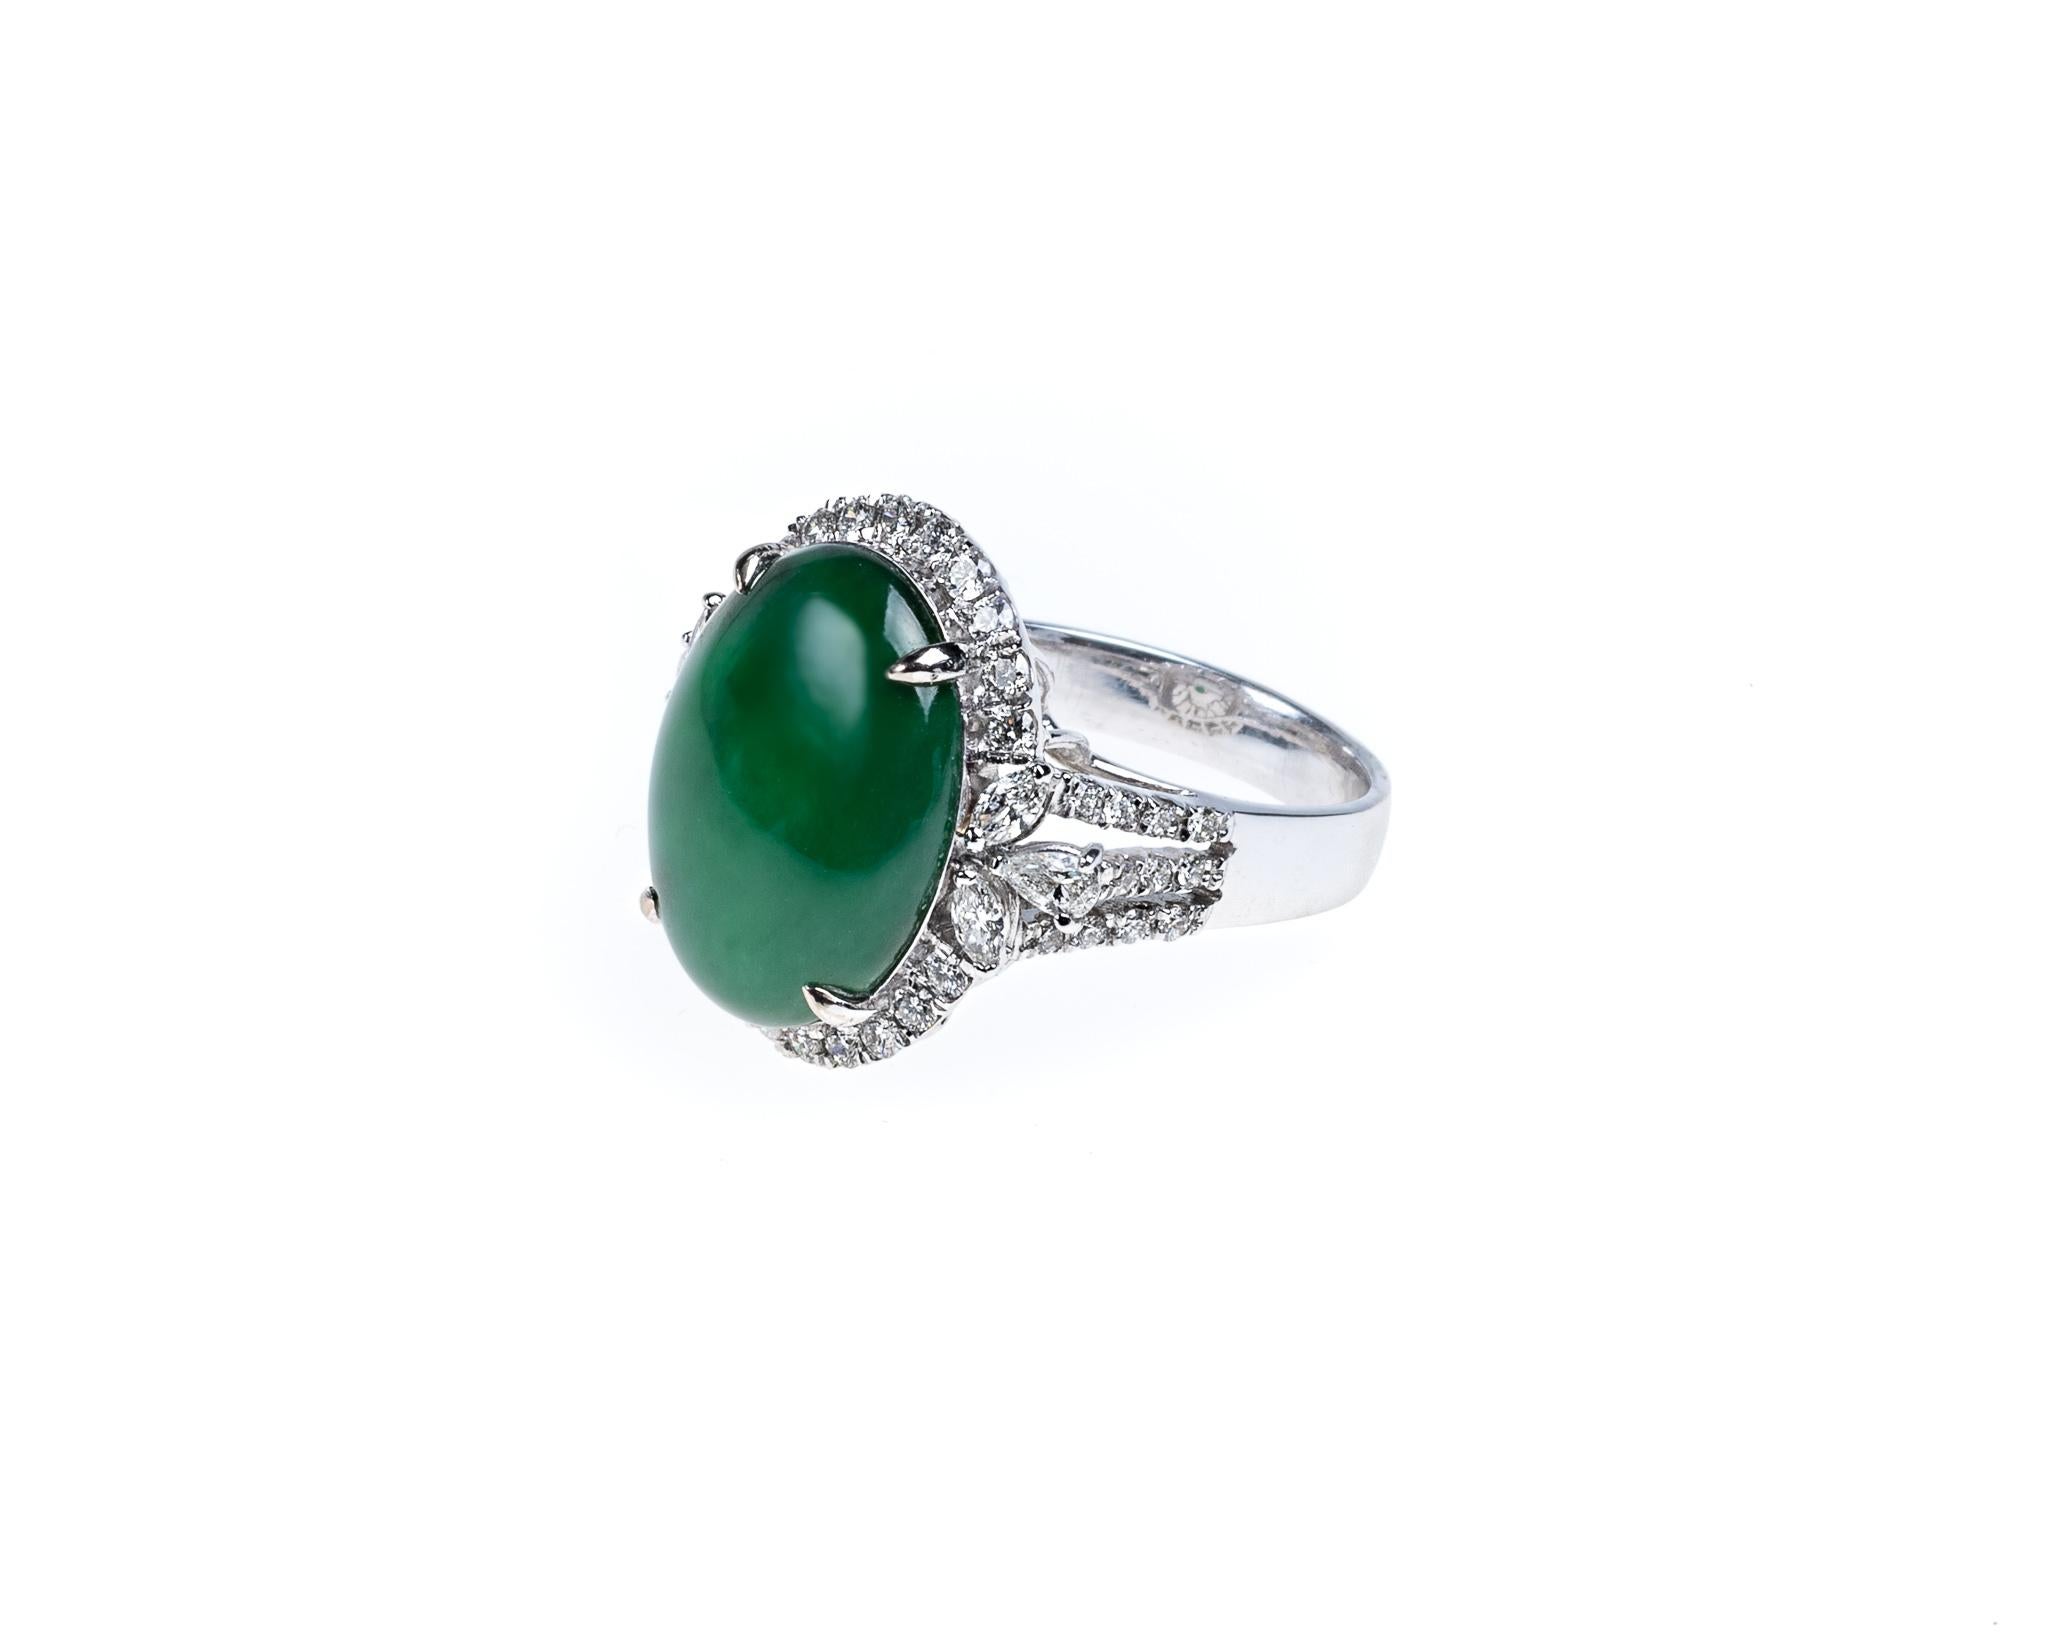 This all natural, untreated jadeite jade carved cabochon is set on an 18K white gold diamond ring setting featuring a halo setting with round brilliant, marquis and pear shaped diamonds with a total weight of 1 carat. 

The jadeite jade cabochon